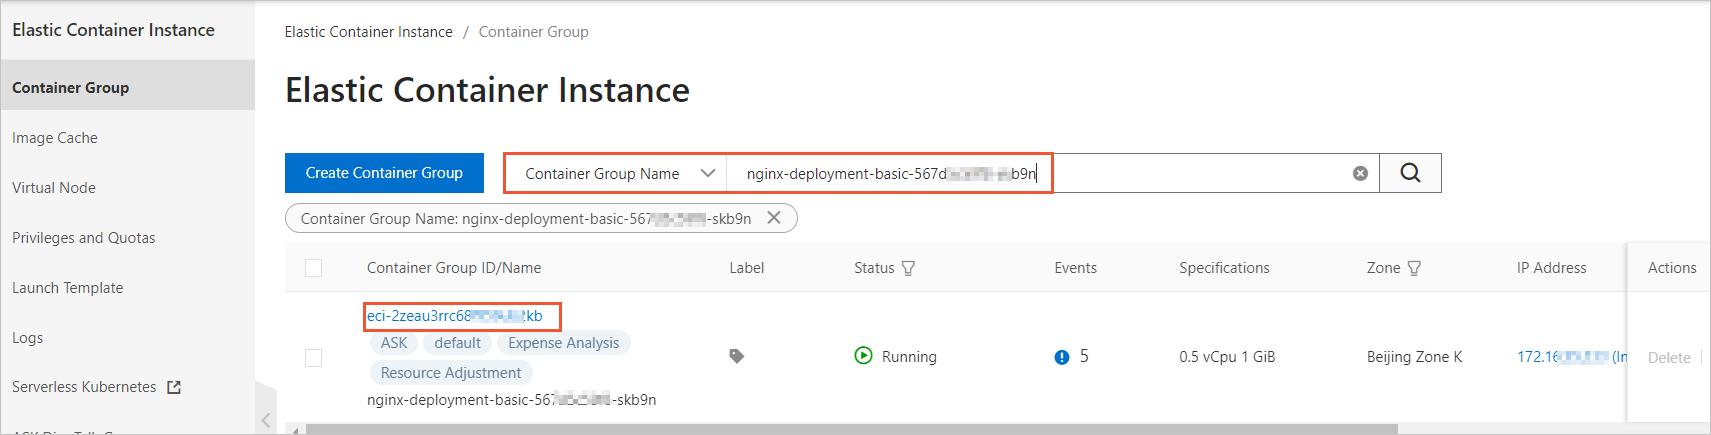 View the ID of an elastic container instance in the console